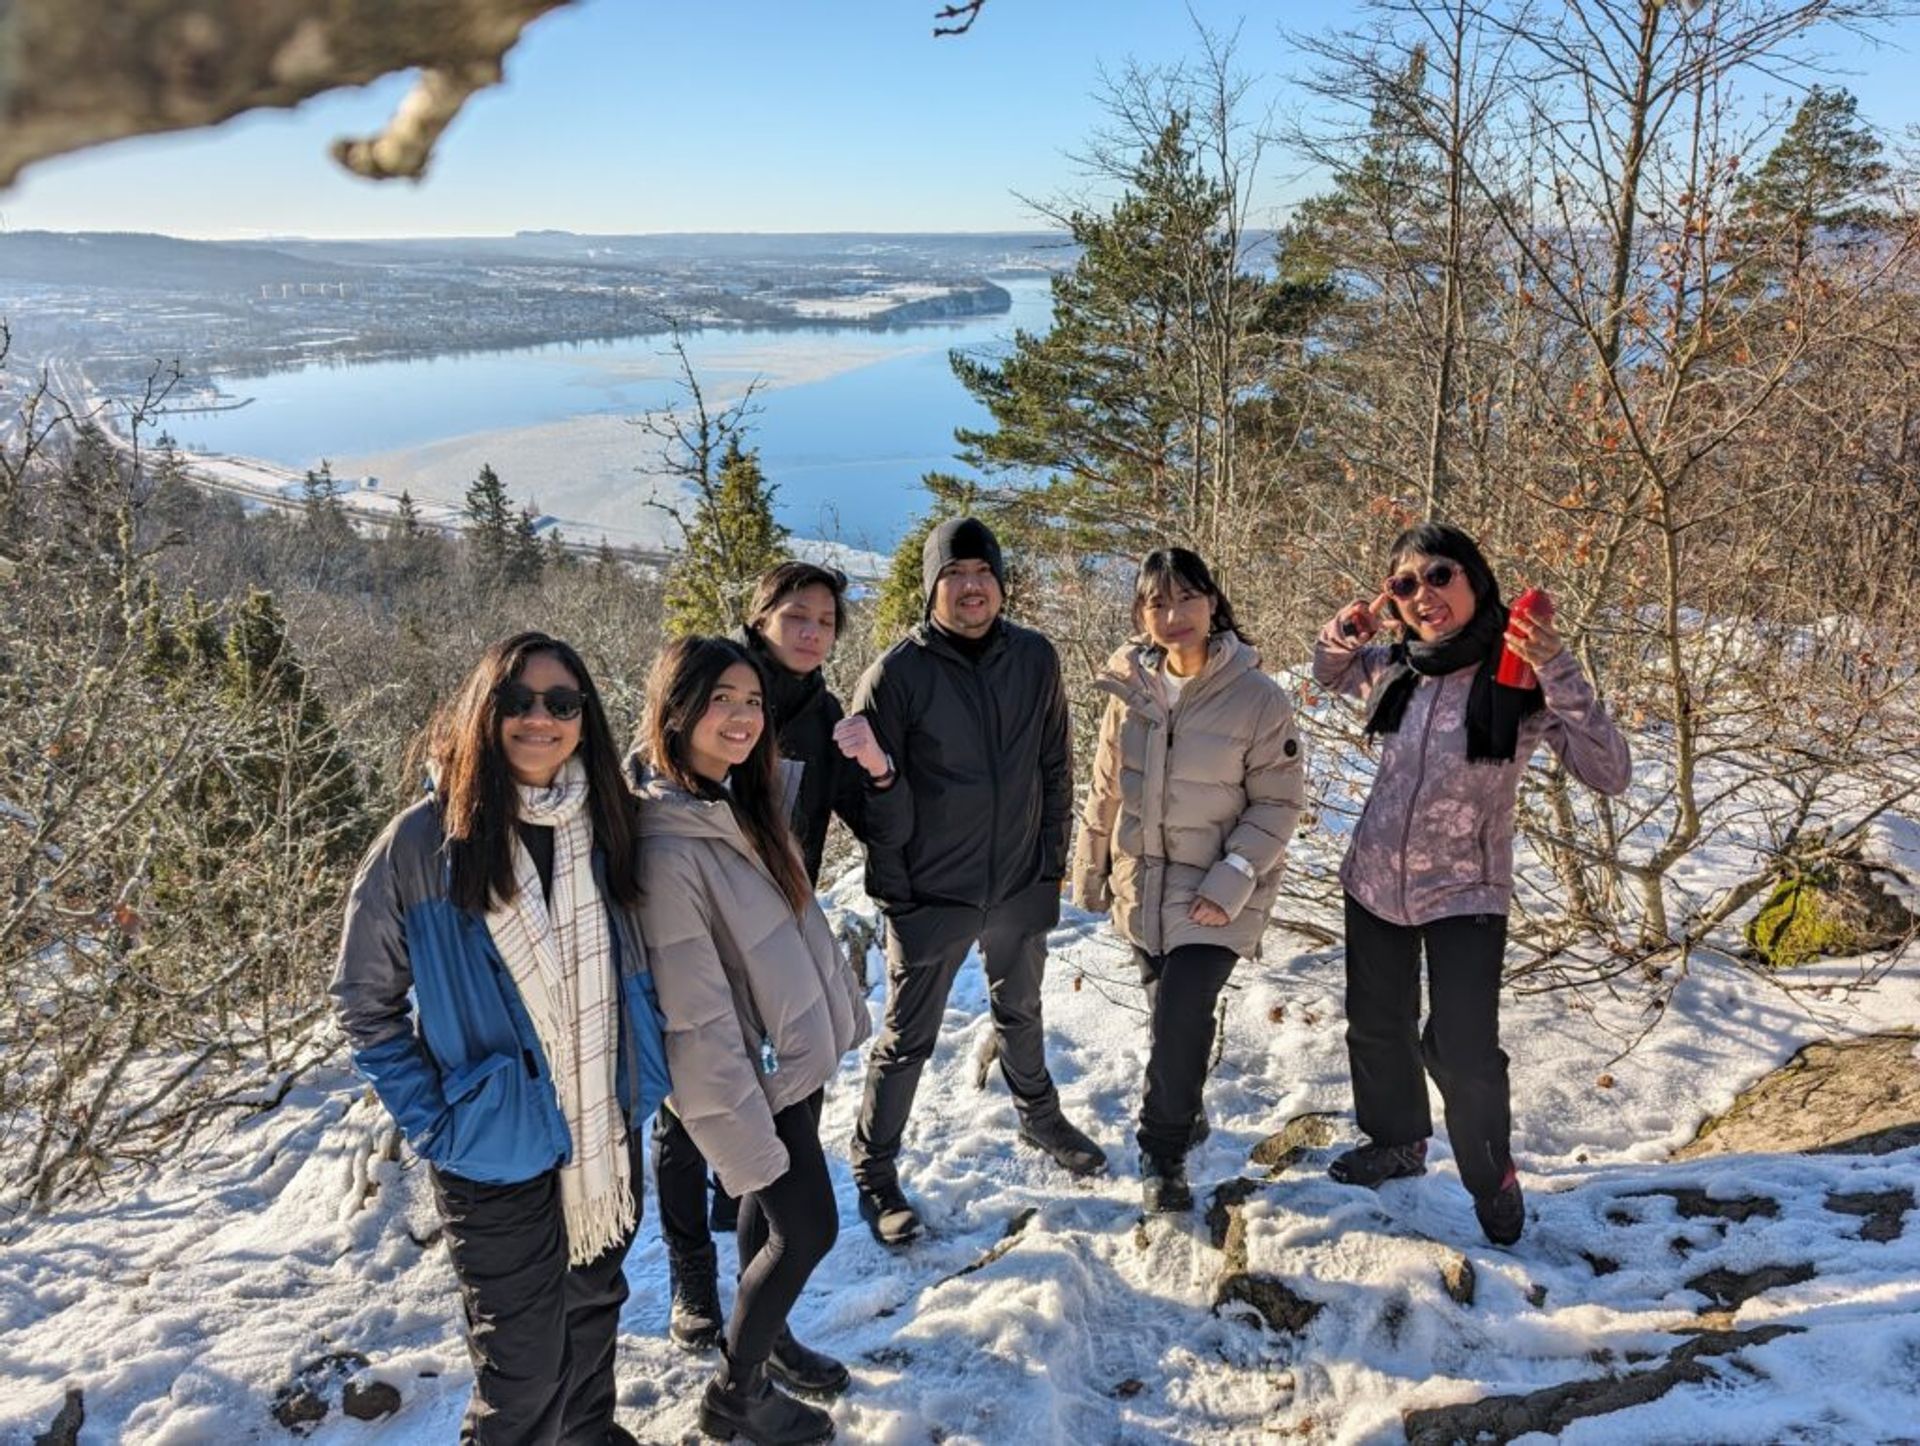 A group of international students from Indonesia posing on a snowy hill while on a hike in Jönköping, Sweden.